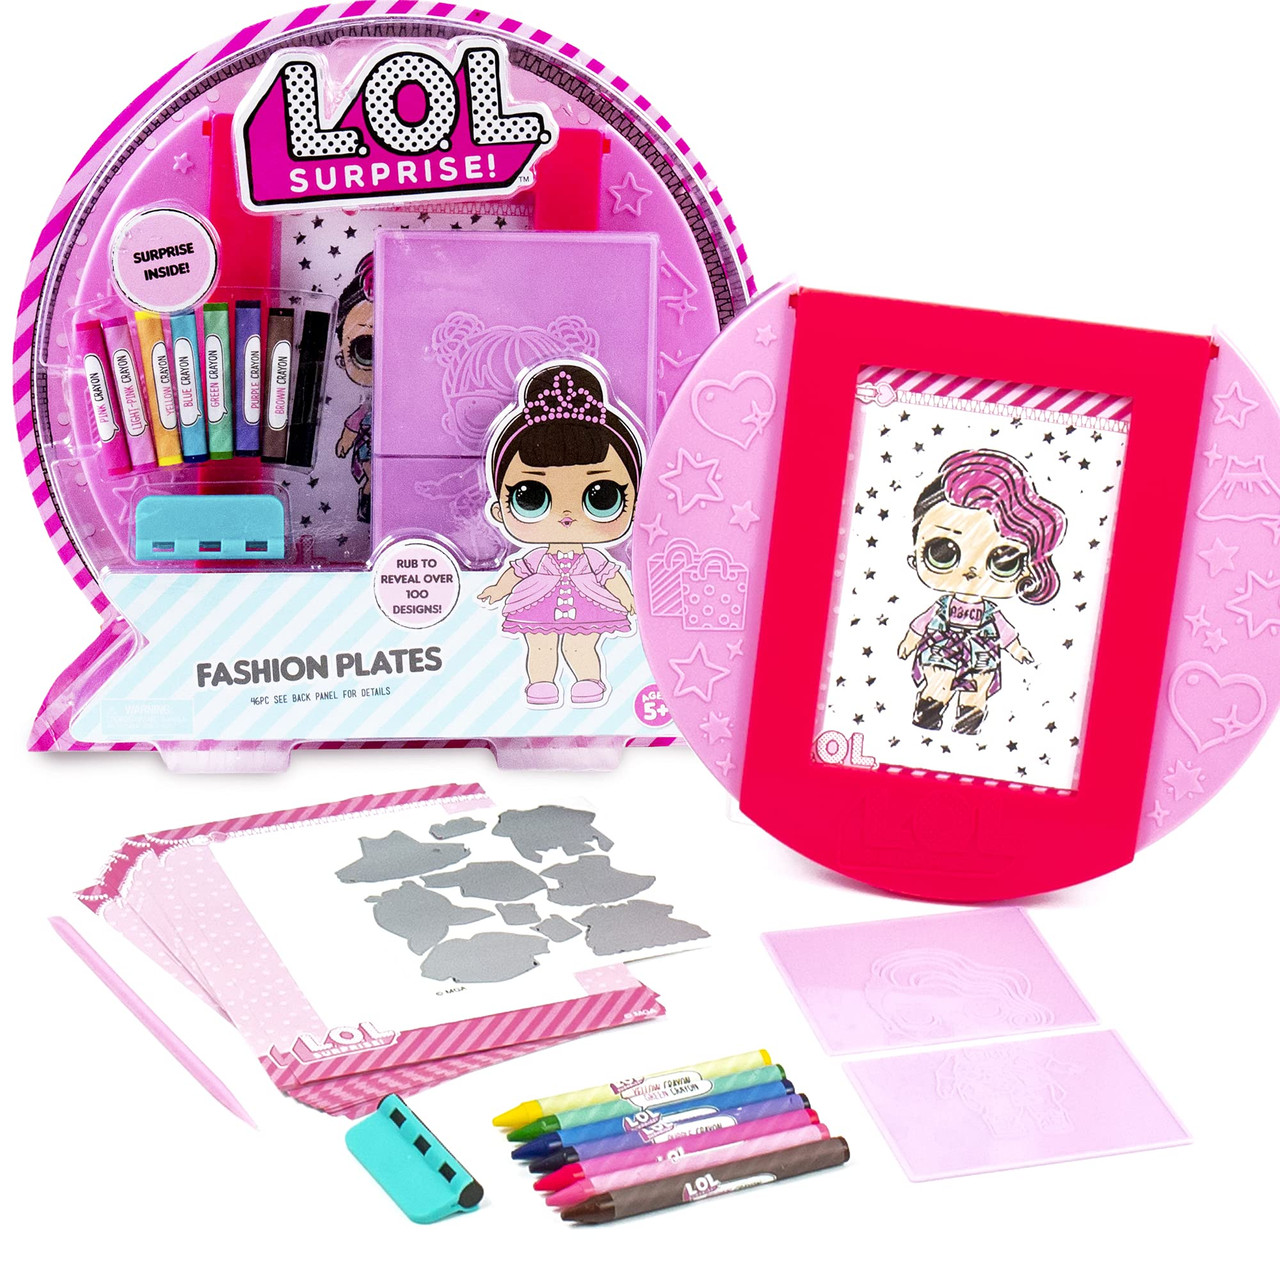 L.O.L. Surprise! Fashion Plates by Horizon Group USA,DIY Fashion Design  Activity Kit, Make Over 100 Designs, 14 Fashion Plates, 20 Sheets of Paper,  7 Crayons Included - Toys 4 U